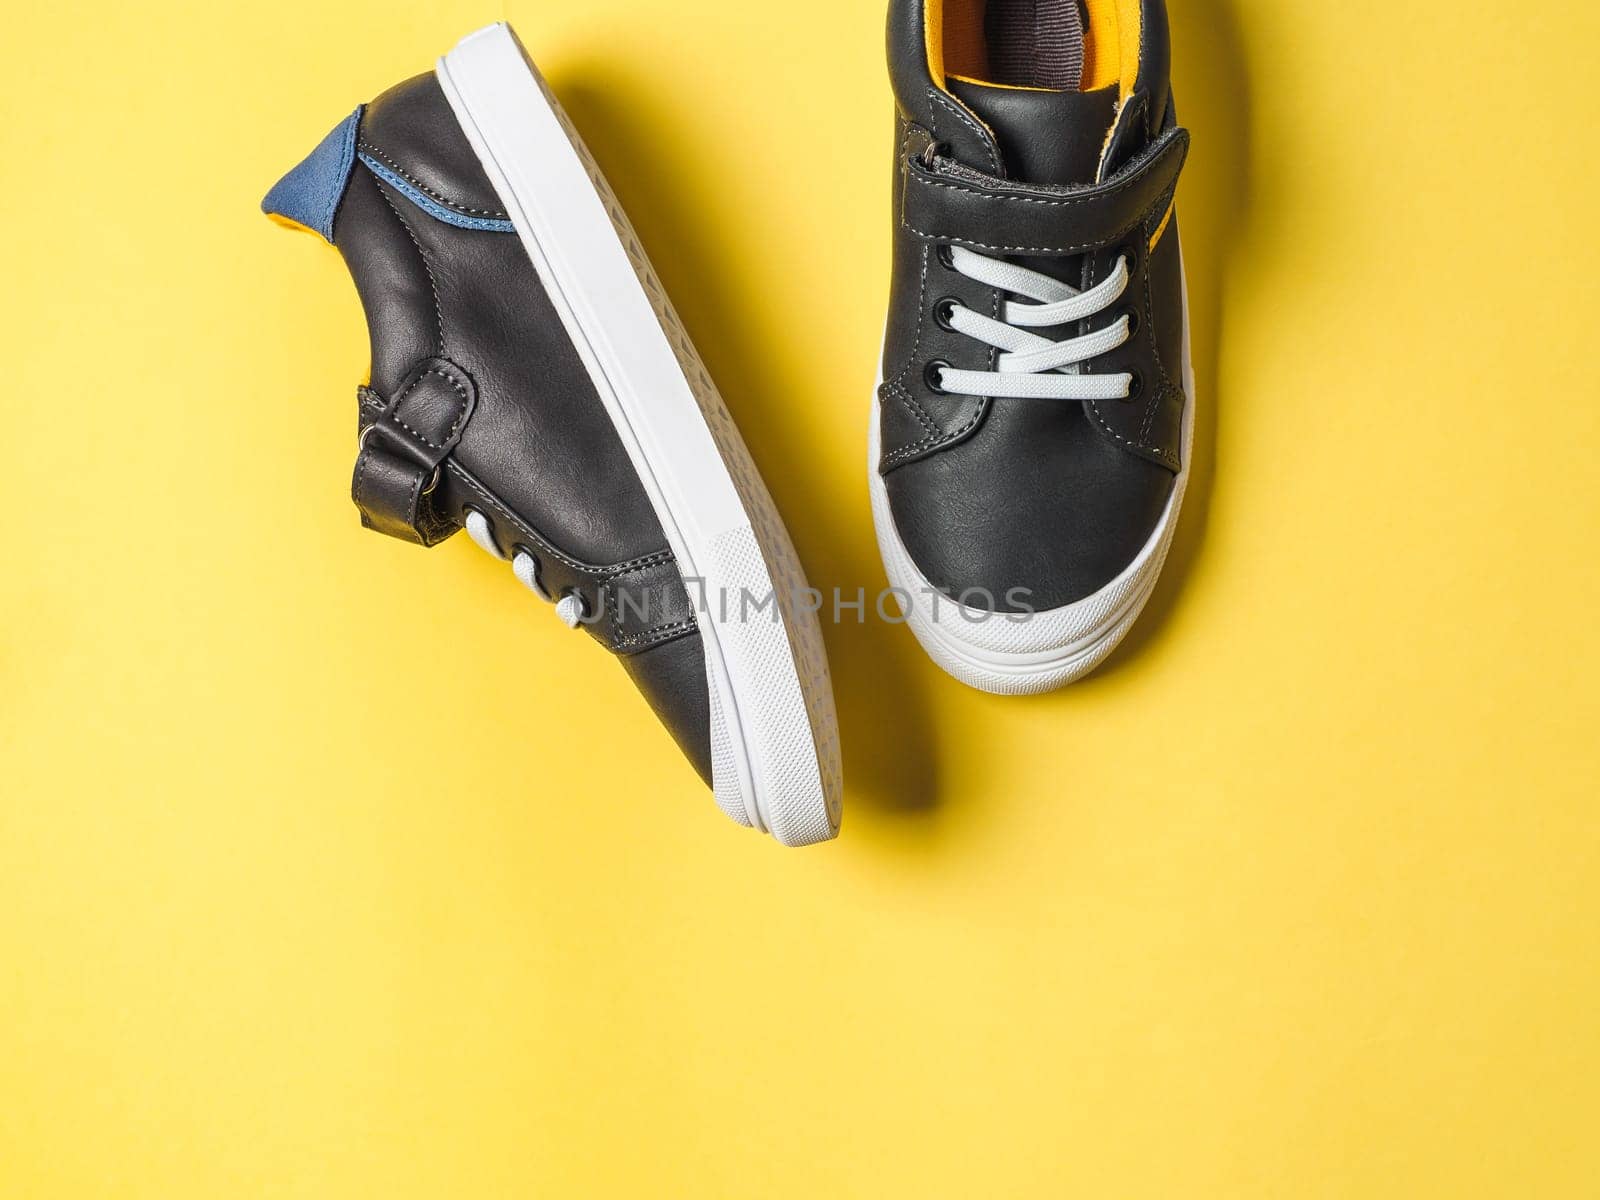 Gray and yellow sneakers on yellow background by fascinadora